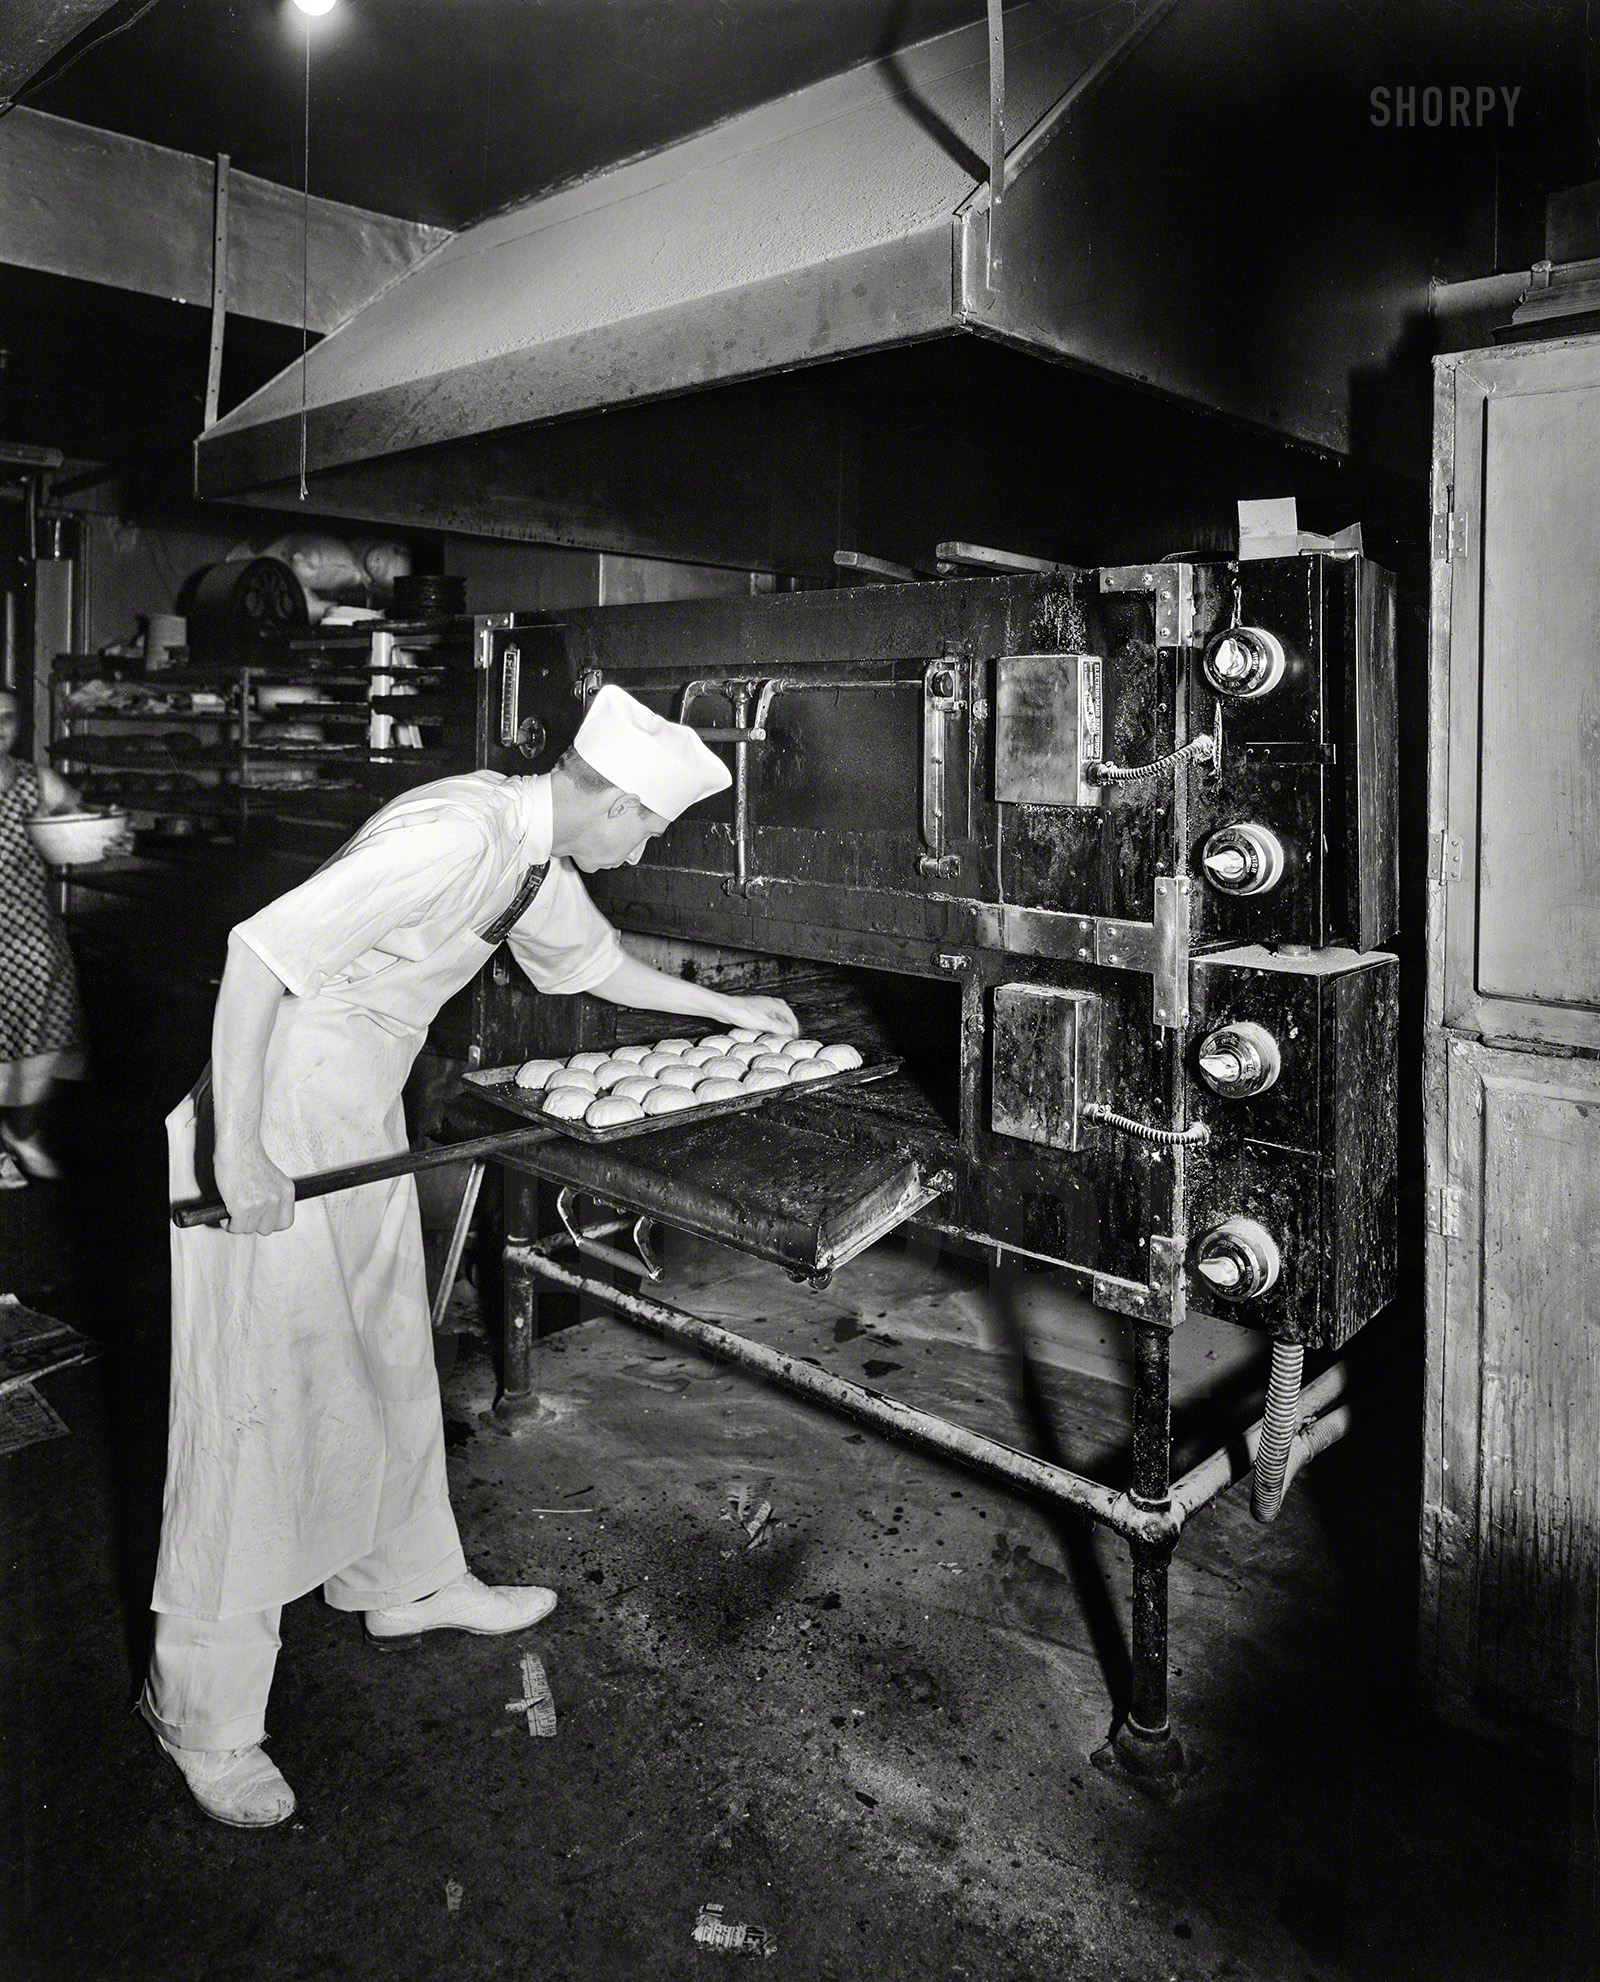 &nbsp; &nbsp; &nbsp; &nbsp; UPDATE: This was the Electrik Maid Bakery at 7000 Carroll Avenue in Takoma Park.
Montgomery County, Md., circa 1950. "Potomac Electric Power Co. -- Commercial kitchens, restaurants and lighting. Takoma Park Bakery." We're guessing these are not gluten-free. 8x10 acetate negative by Theodor Horydczak.  View full size.